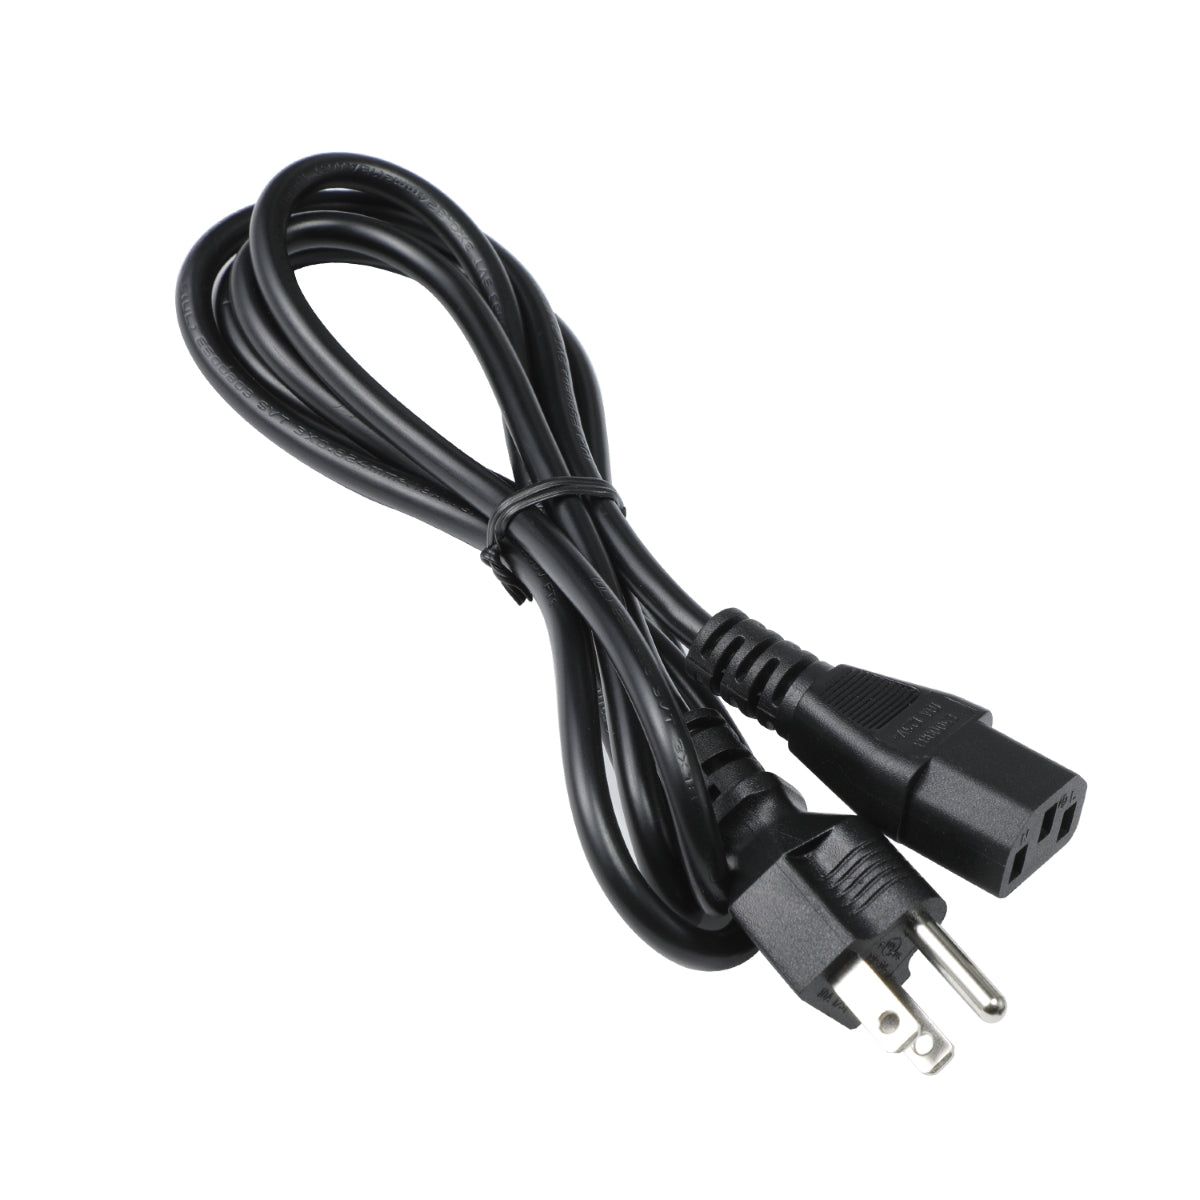 Power Cord for HP Pavilion Power 580-023w Computer.